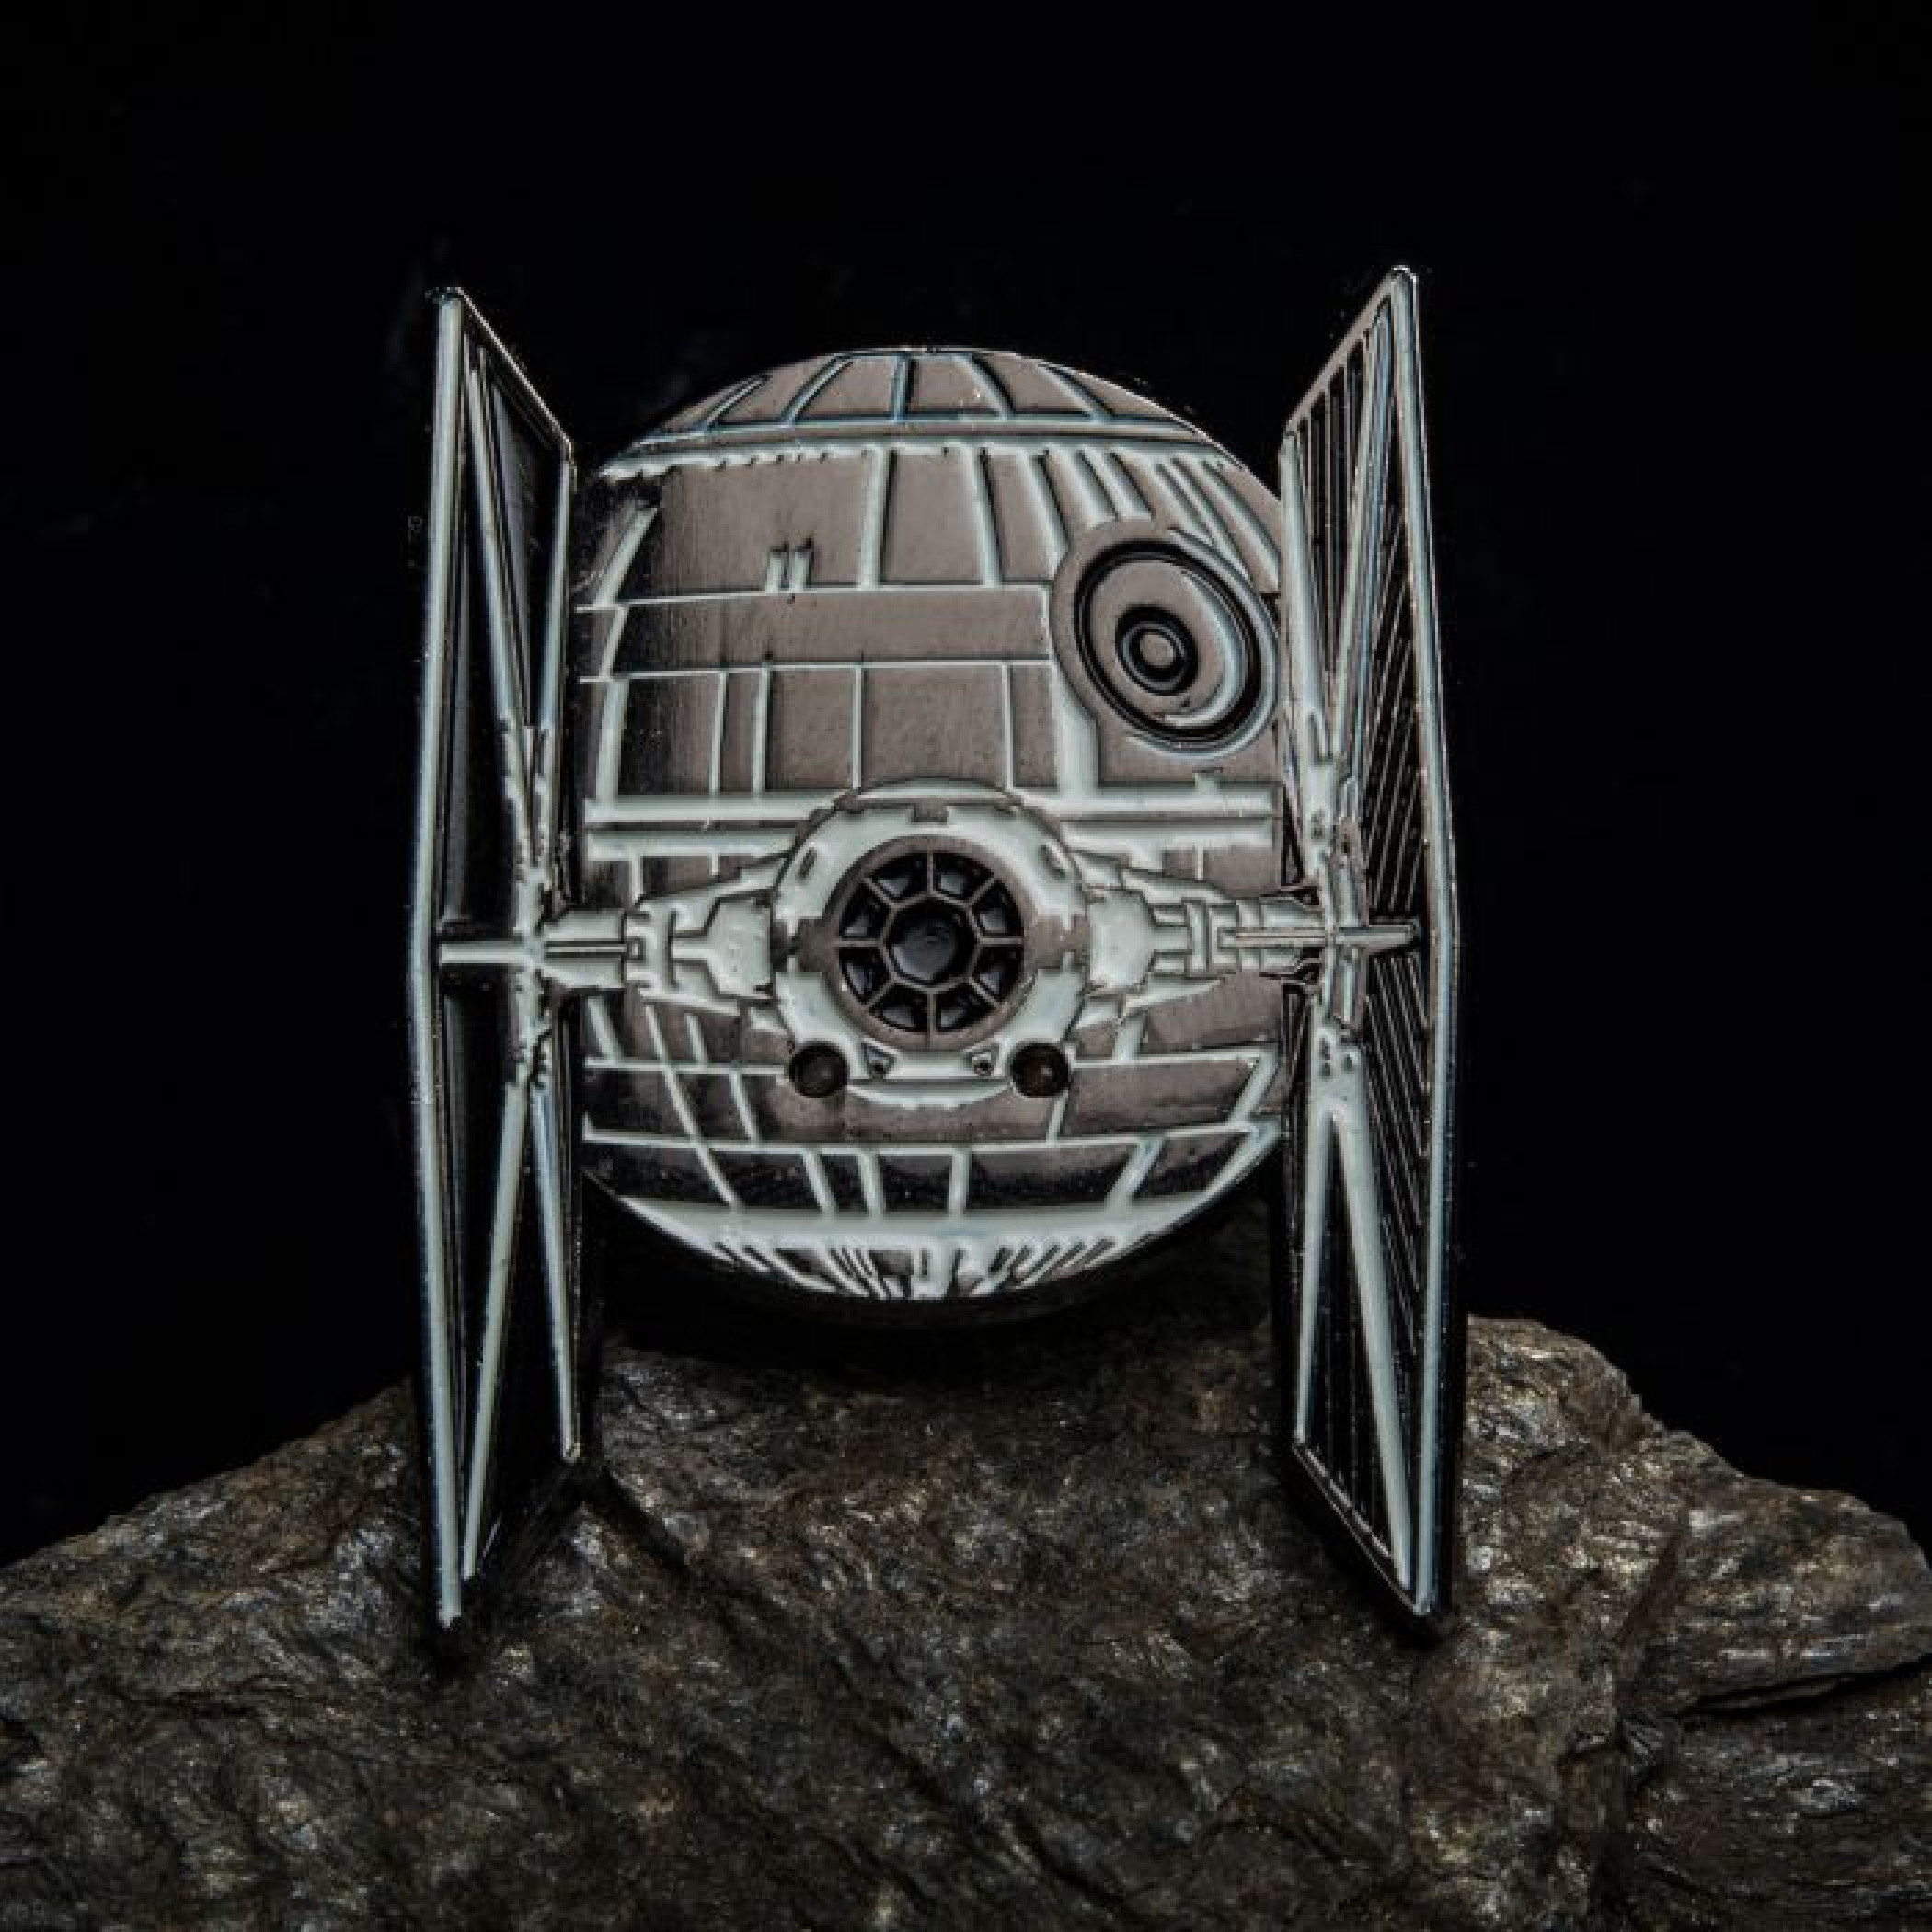 Star Wars Tie Fighter And Death Star Light Up Pin